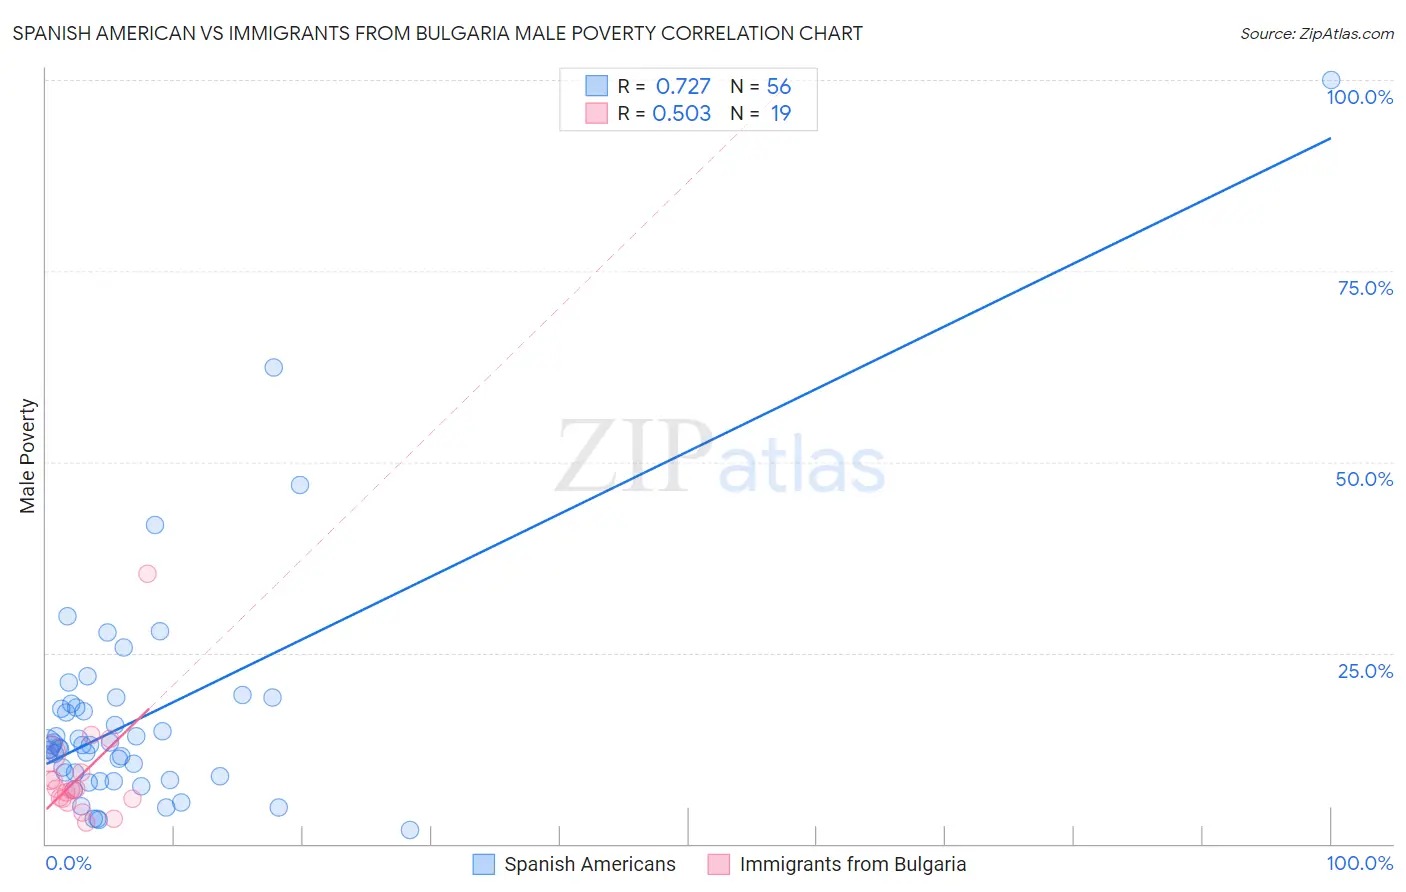 Spanish American vs Immigrants from Bulgaria Male Poverty